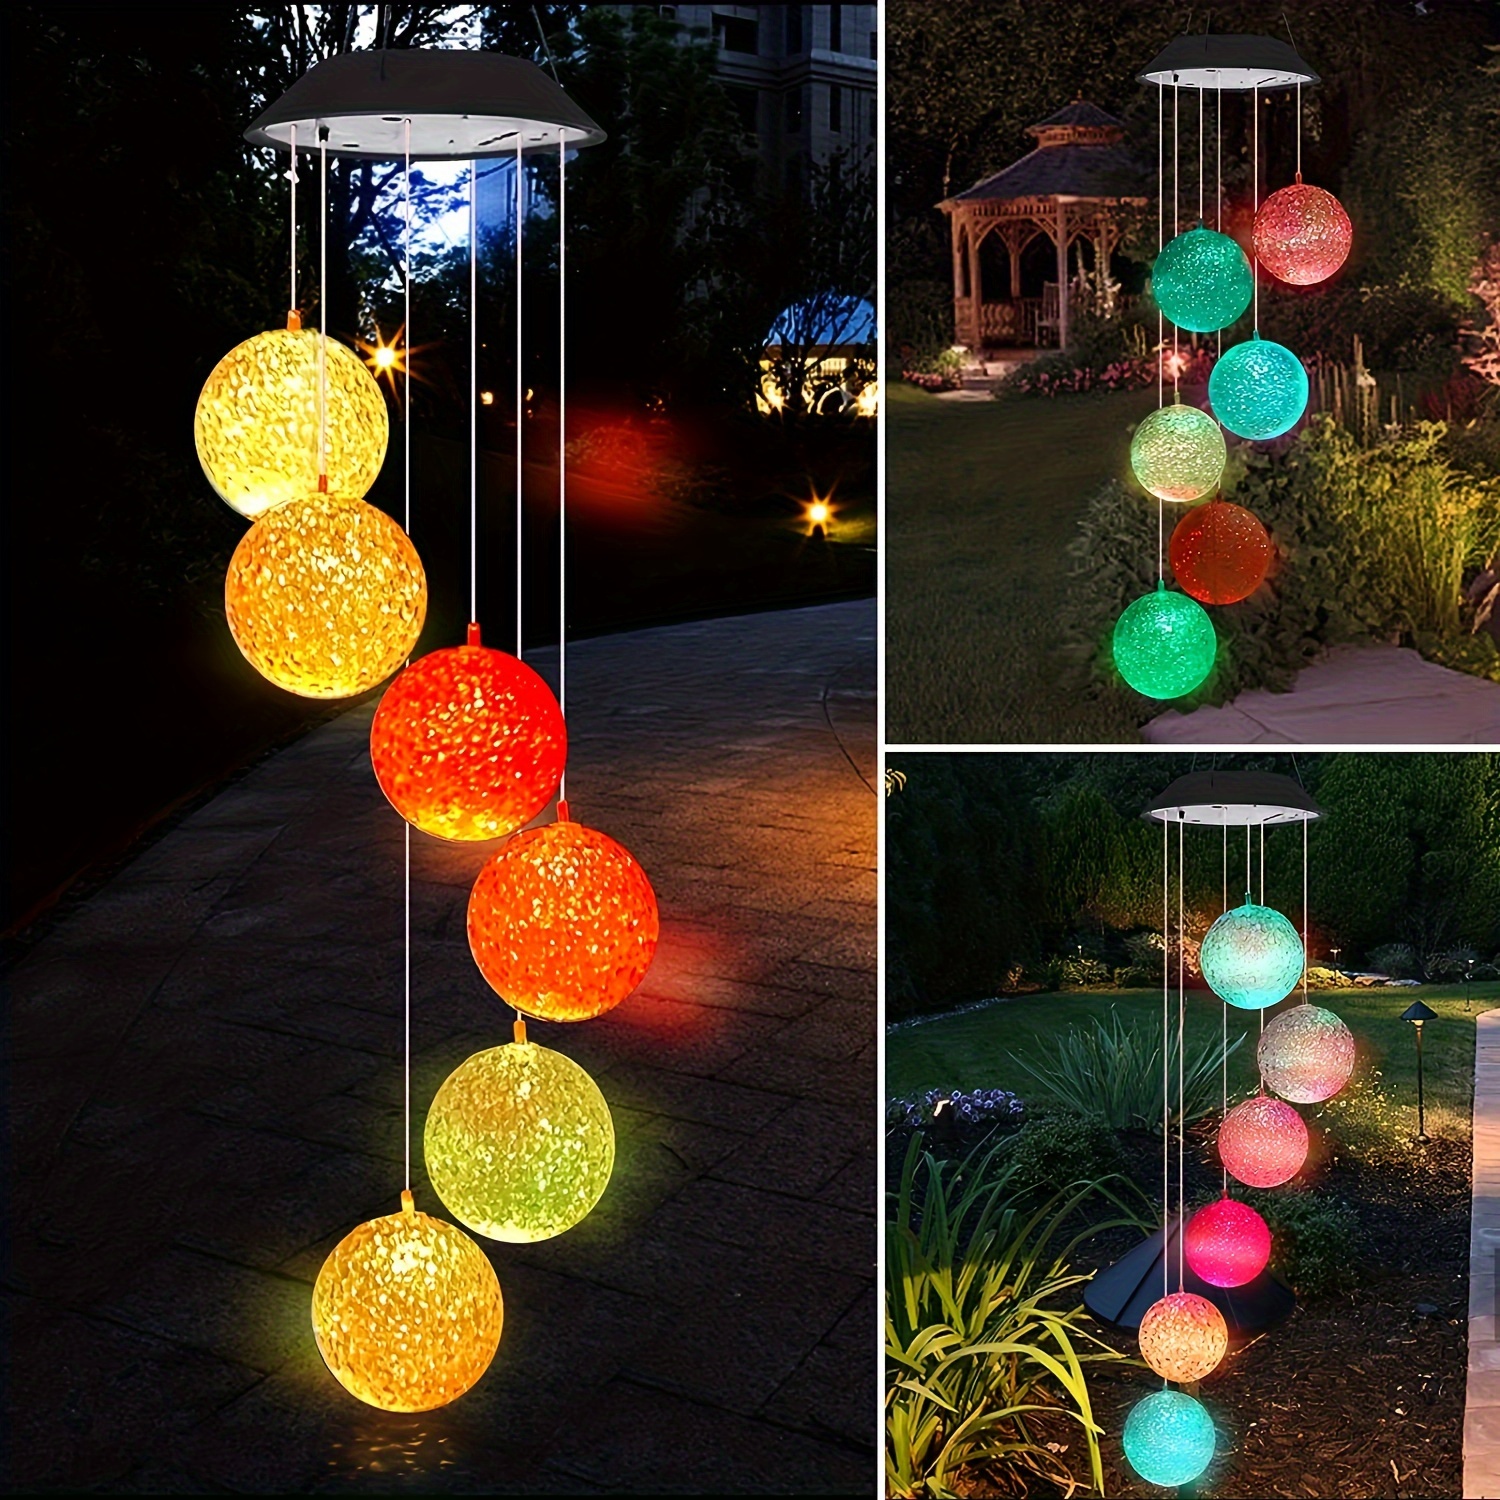 

Solar Wind Chimes - 6 Led Crystal Ball Hanging Decor, Solar-powered Colorful Romantic Garden Lights, Pvc Material, Nickel Battery Charged By Sunlight For Home, Yard, Balcony, Night Outdoor Decoration.